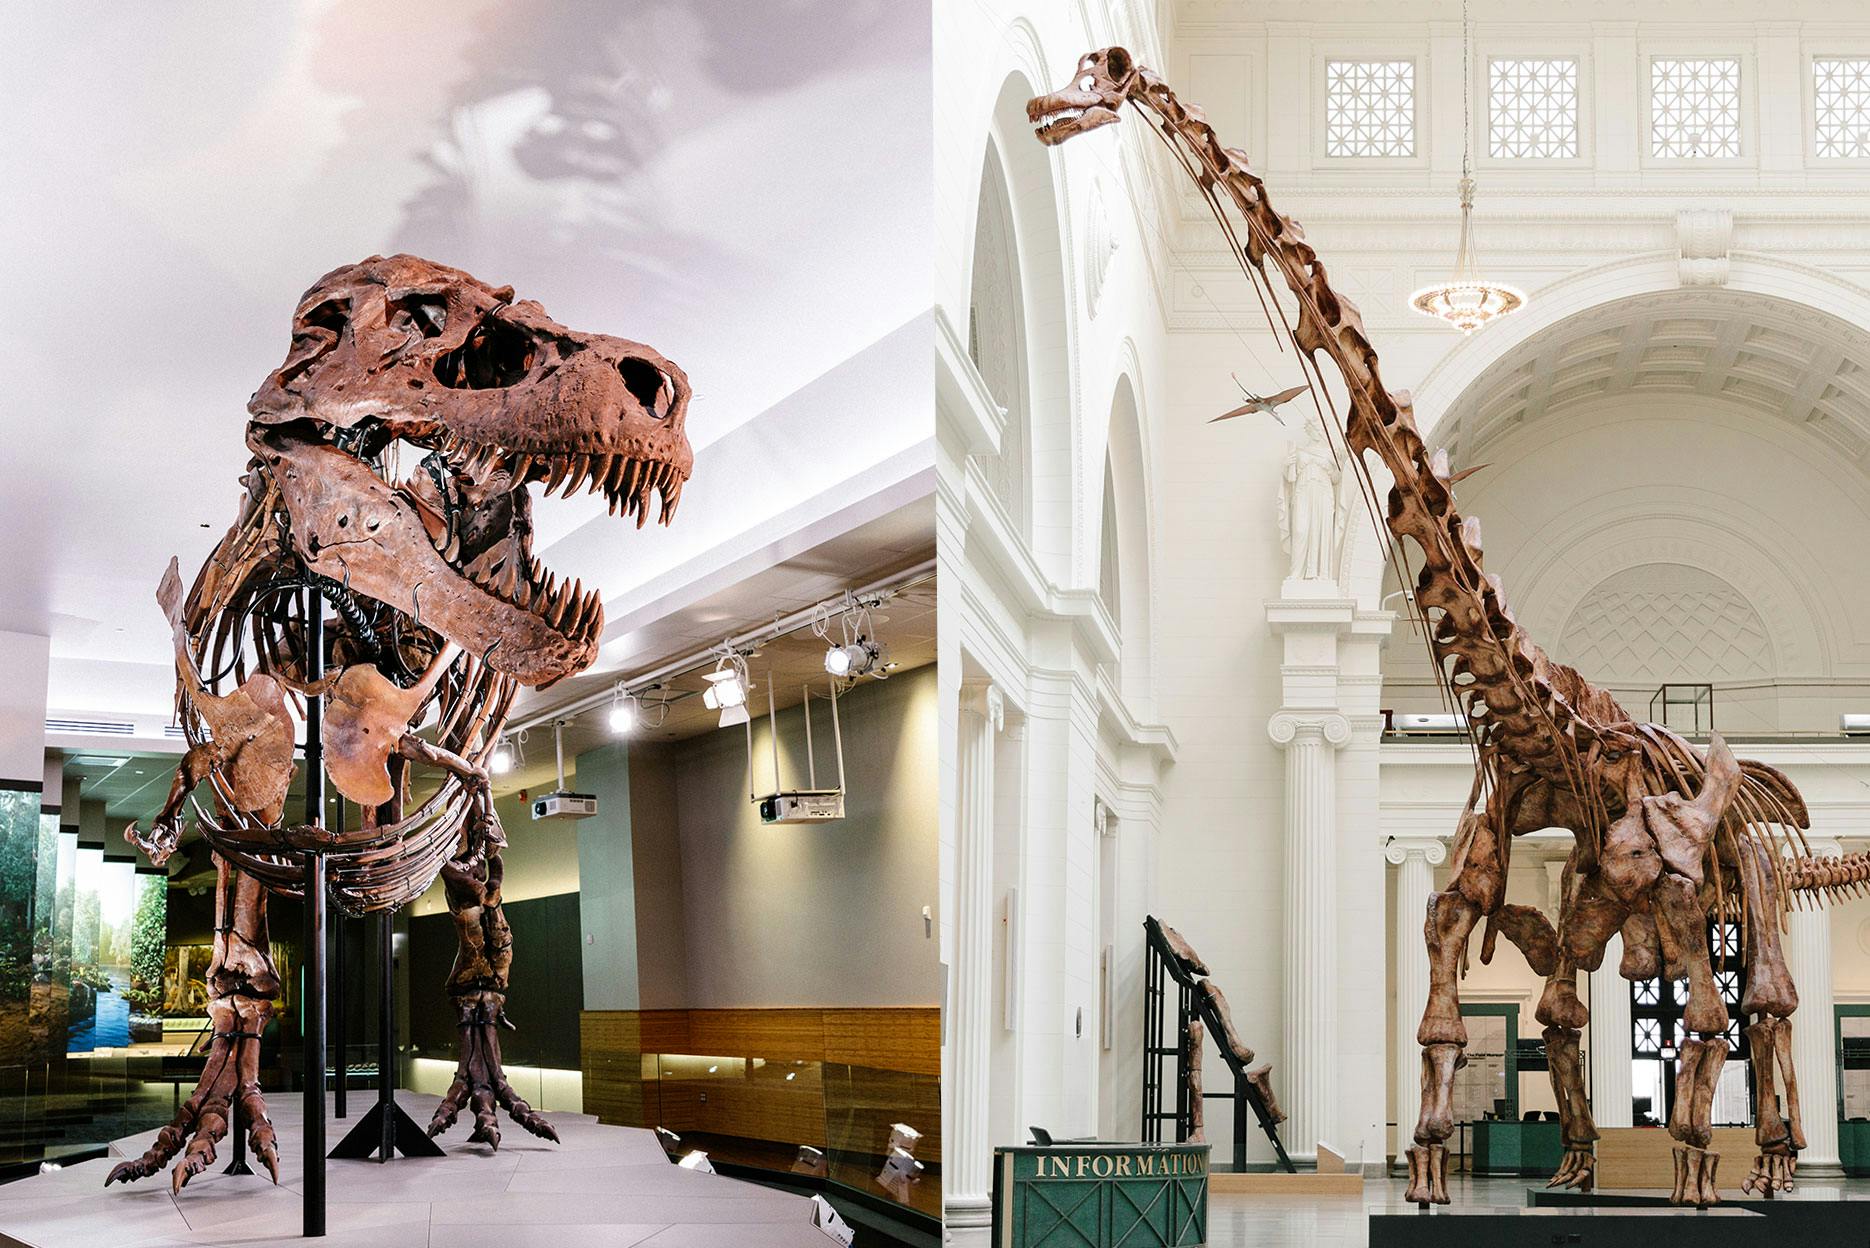 Left: A mounted T. rex skeleton inside a museum gallery. Right: A long-necked titanosaur skeleton in a large classical hall.